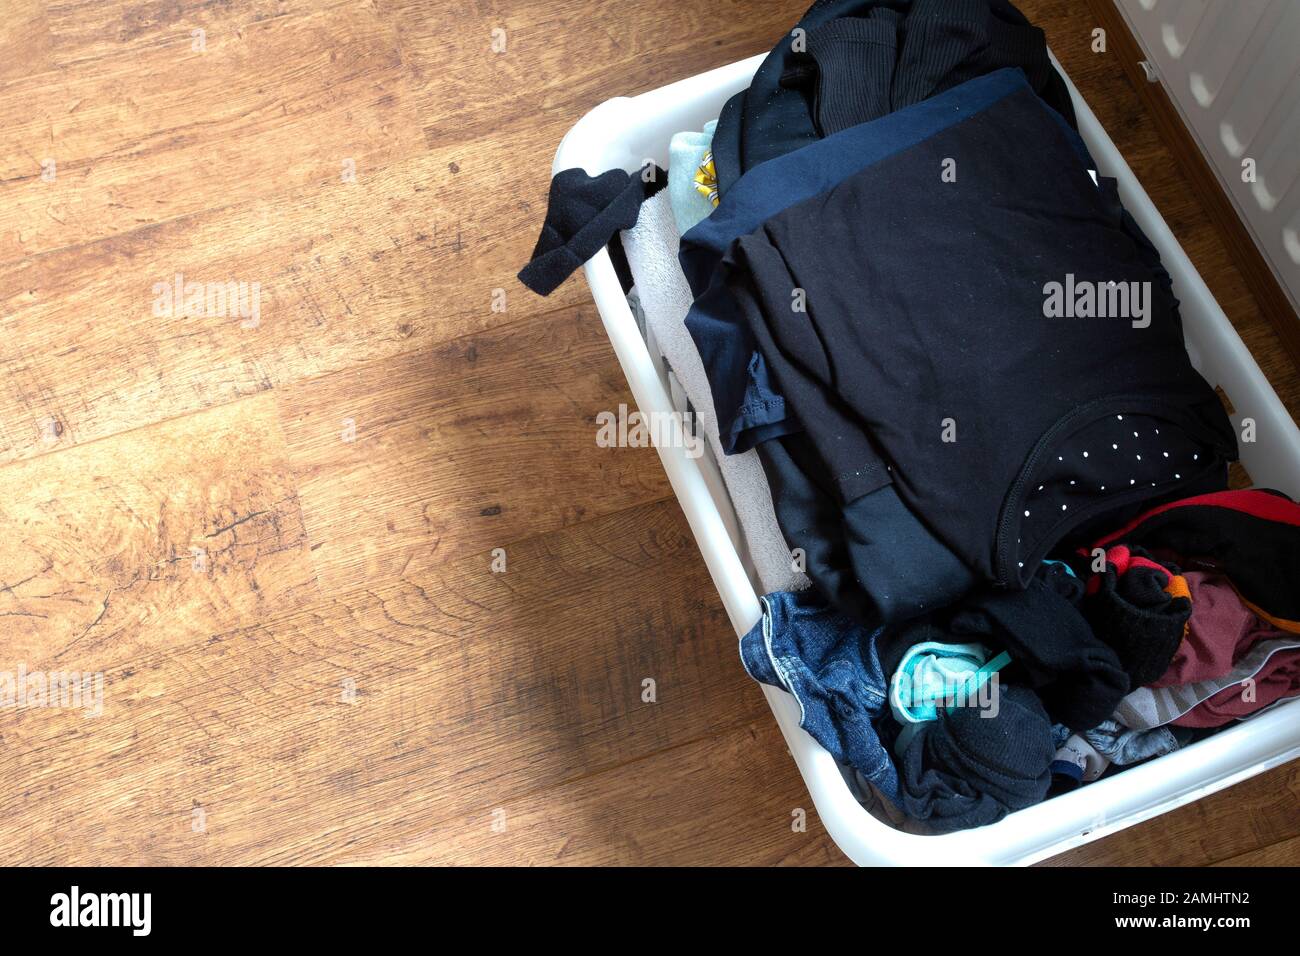 clothes in a full laundry basket on a laminaat floor, top view Stock Photo